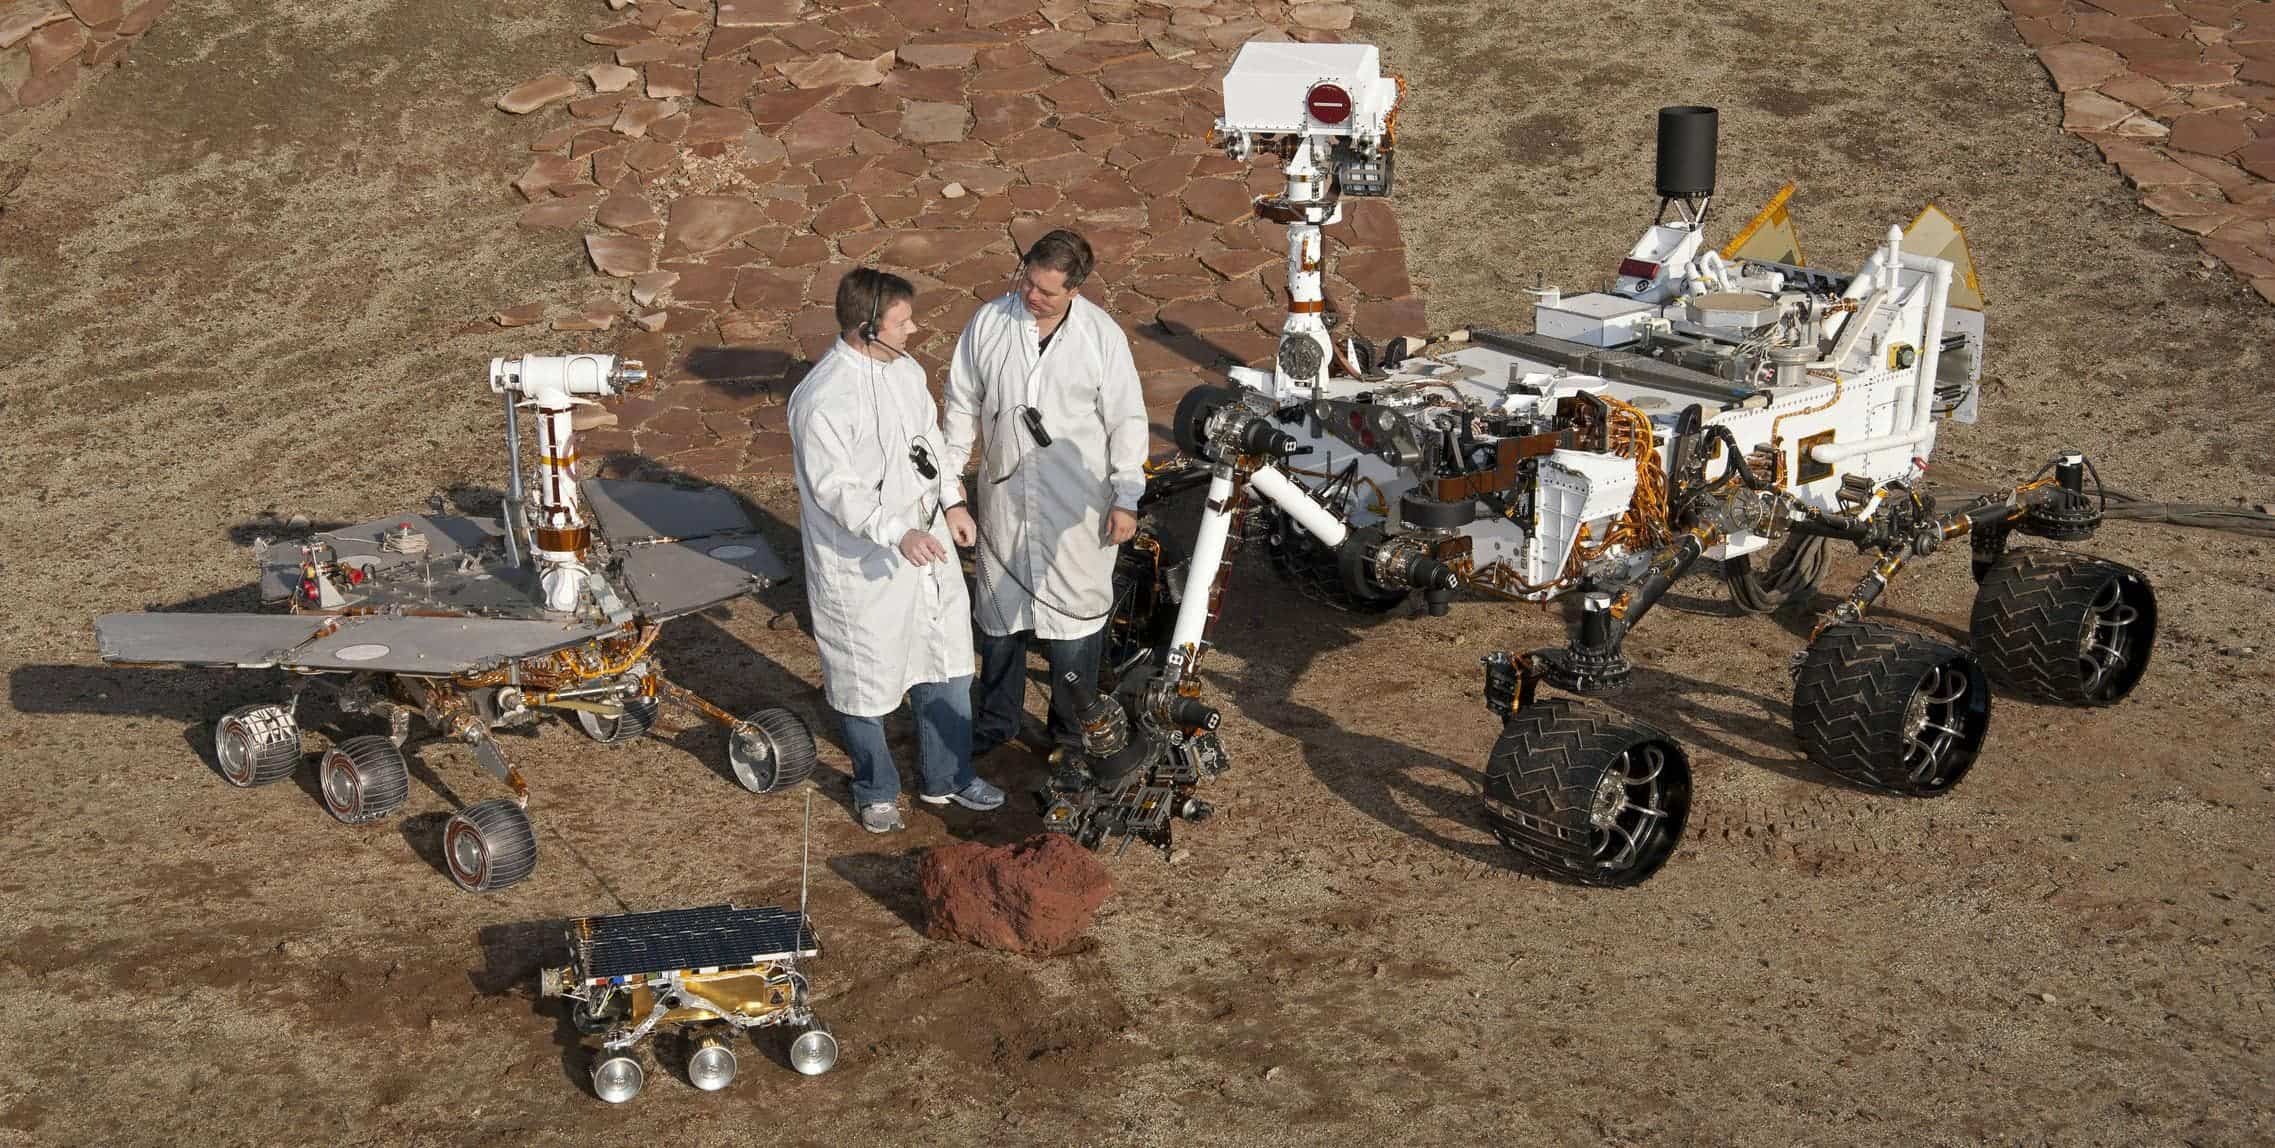 Curiosity day - Curiosity's size compared to other rovers